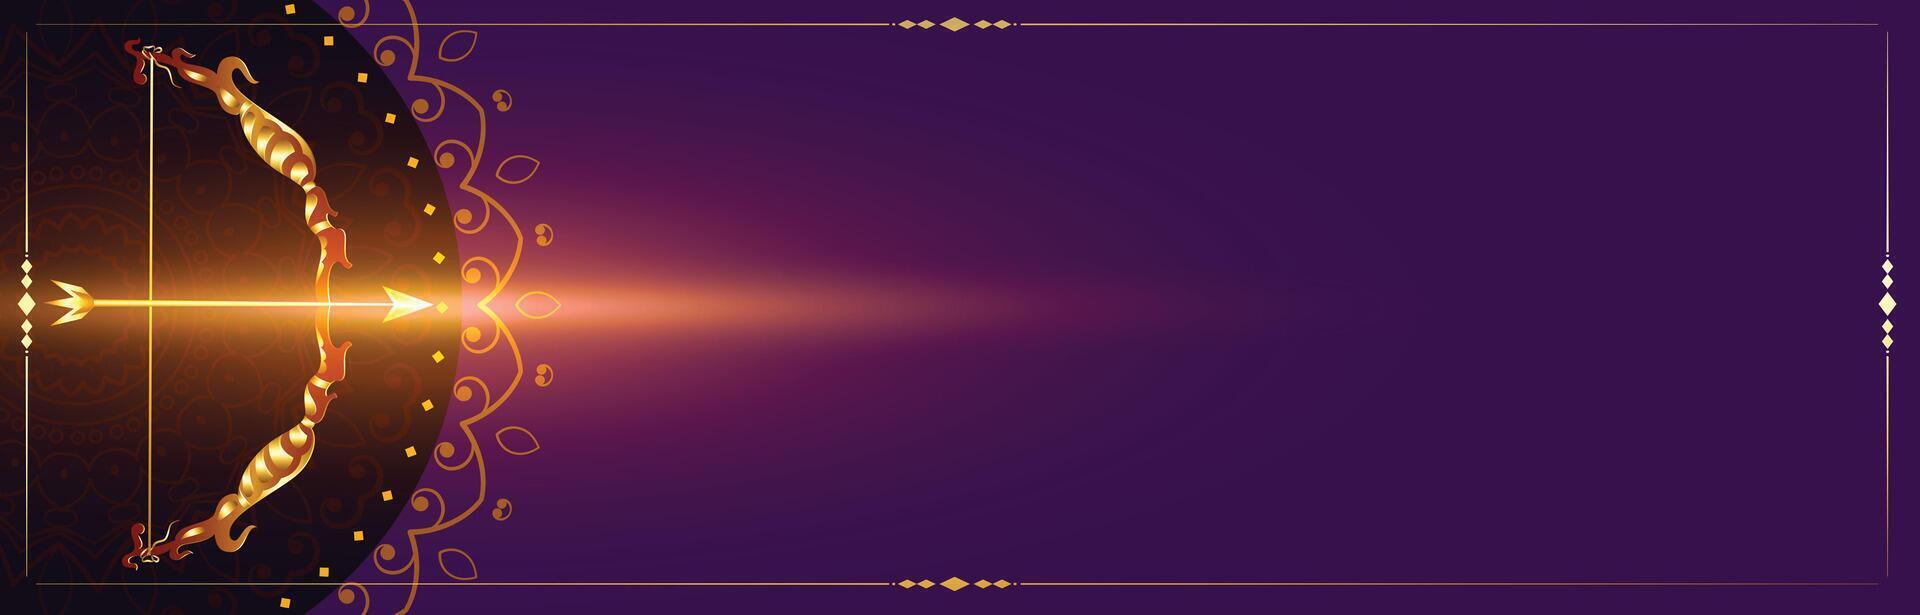 Golden bow and arrow on purple celebration banner vector